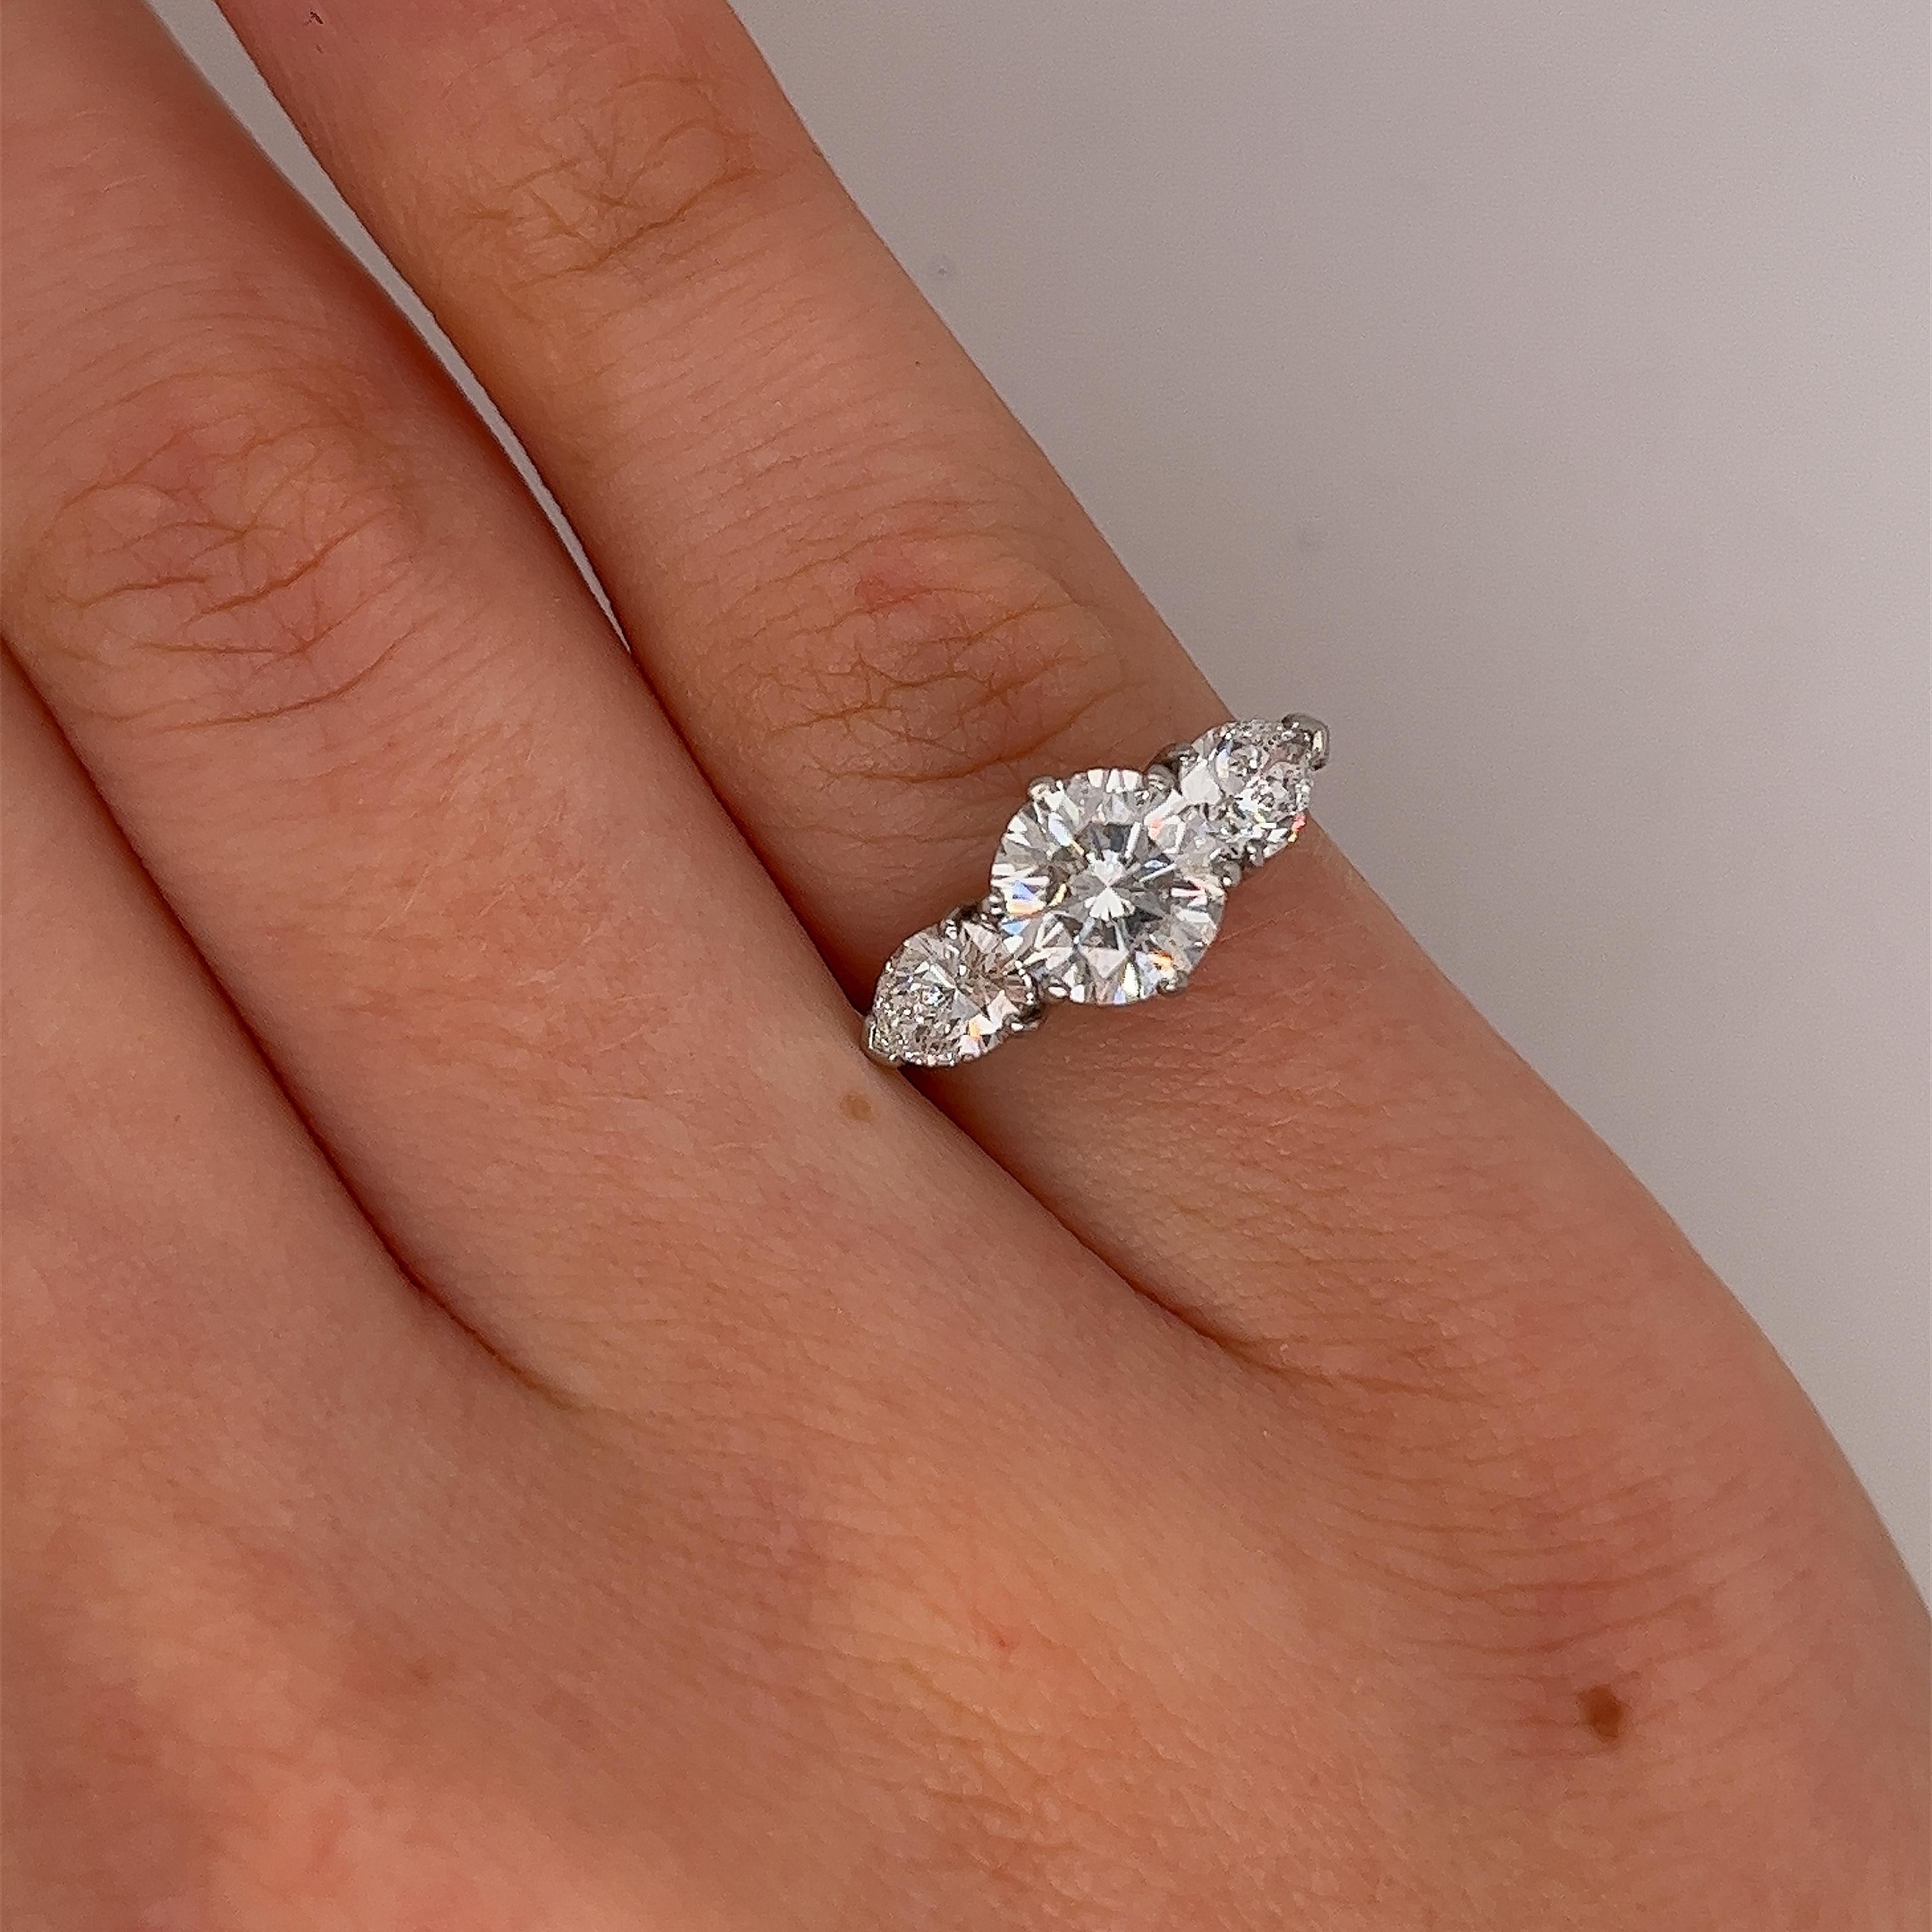 Platinum 3-stone diamond ring set with 1 round brilliant cut GIA certified 1.29ct G/SI1 and 2 matching pear shape diamonds 0.85ct.
This ring is elegant and beautiful for an engagement ring and will last as long as your love does.

·  Total Diamond